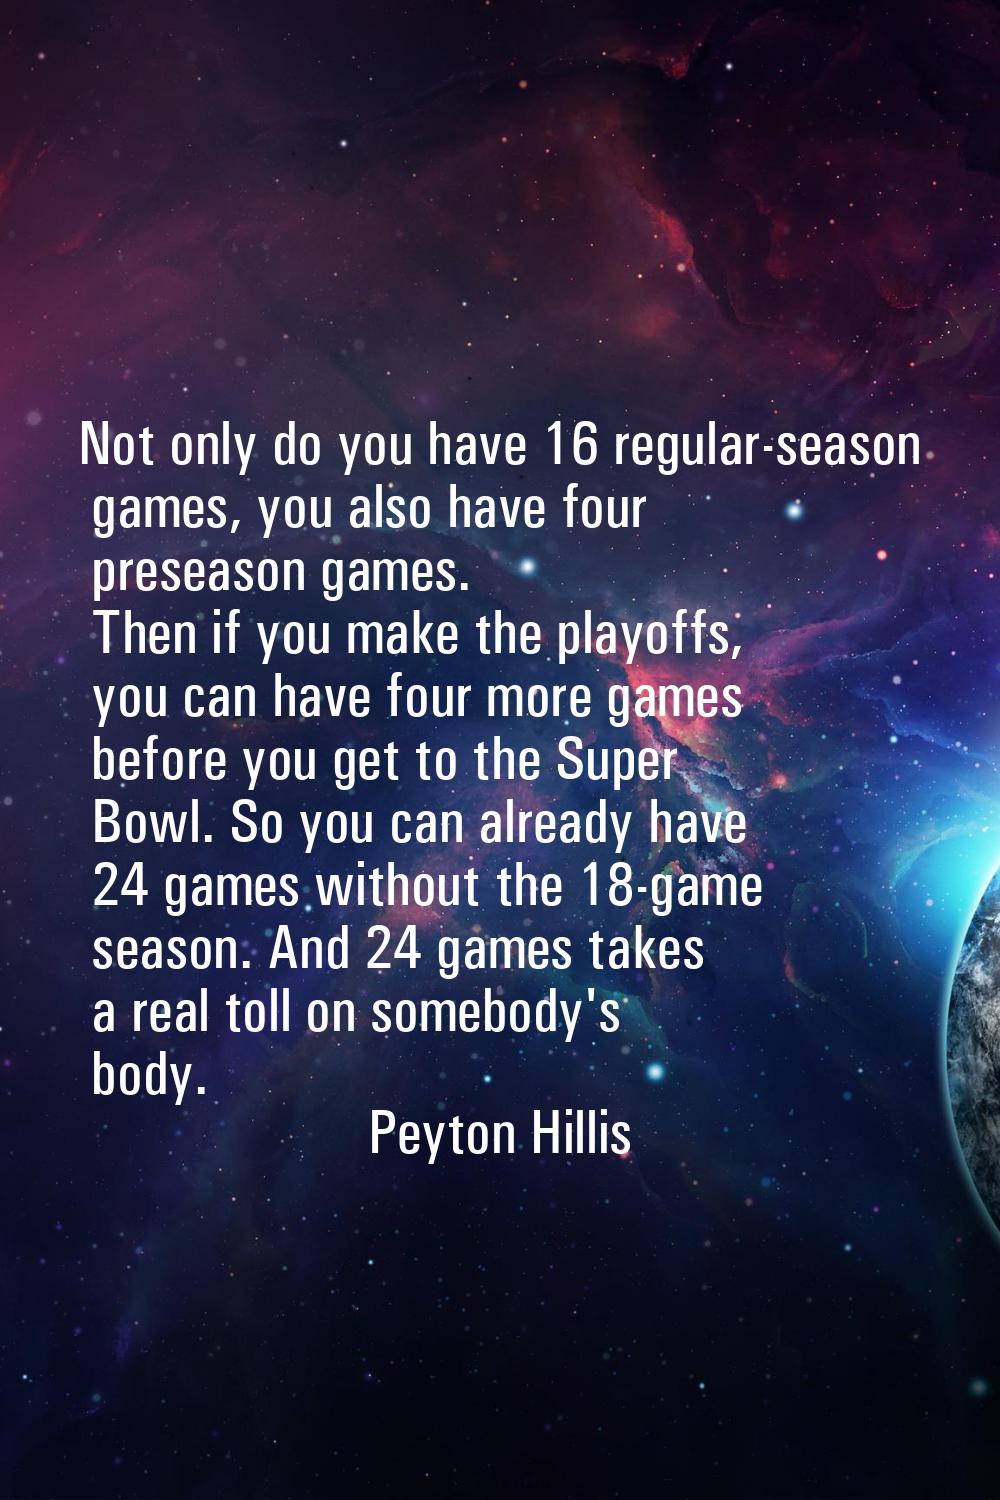 Not only do you have 16 regular-season games, you also have four preseason games. Then if you make 